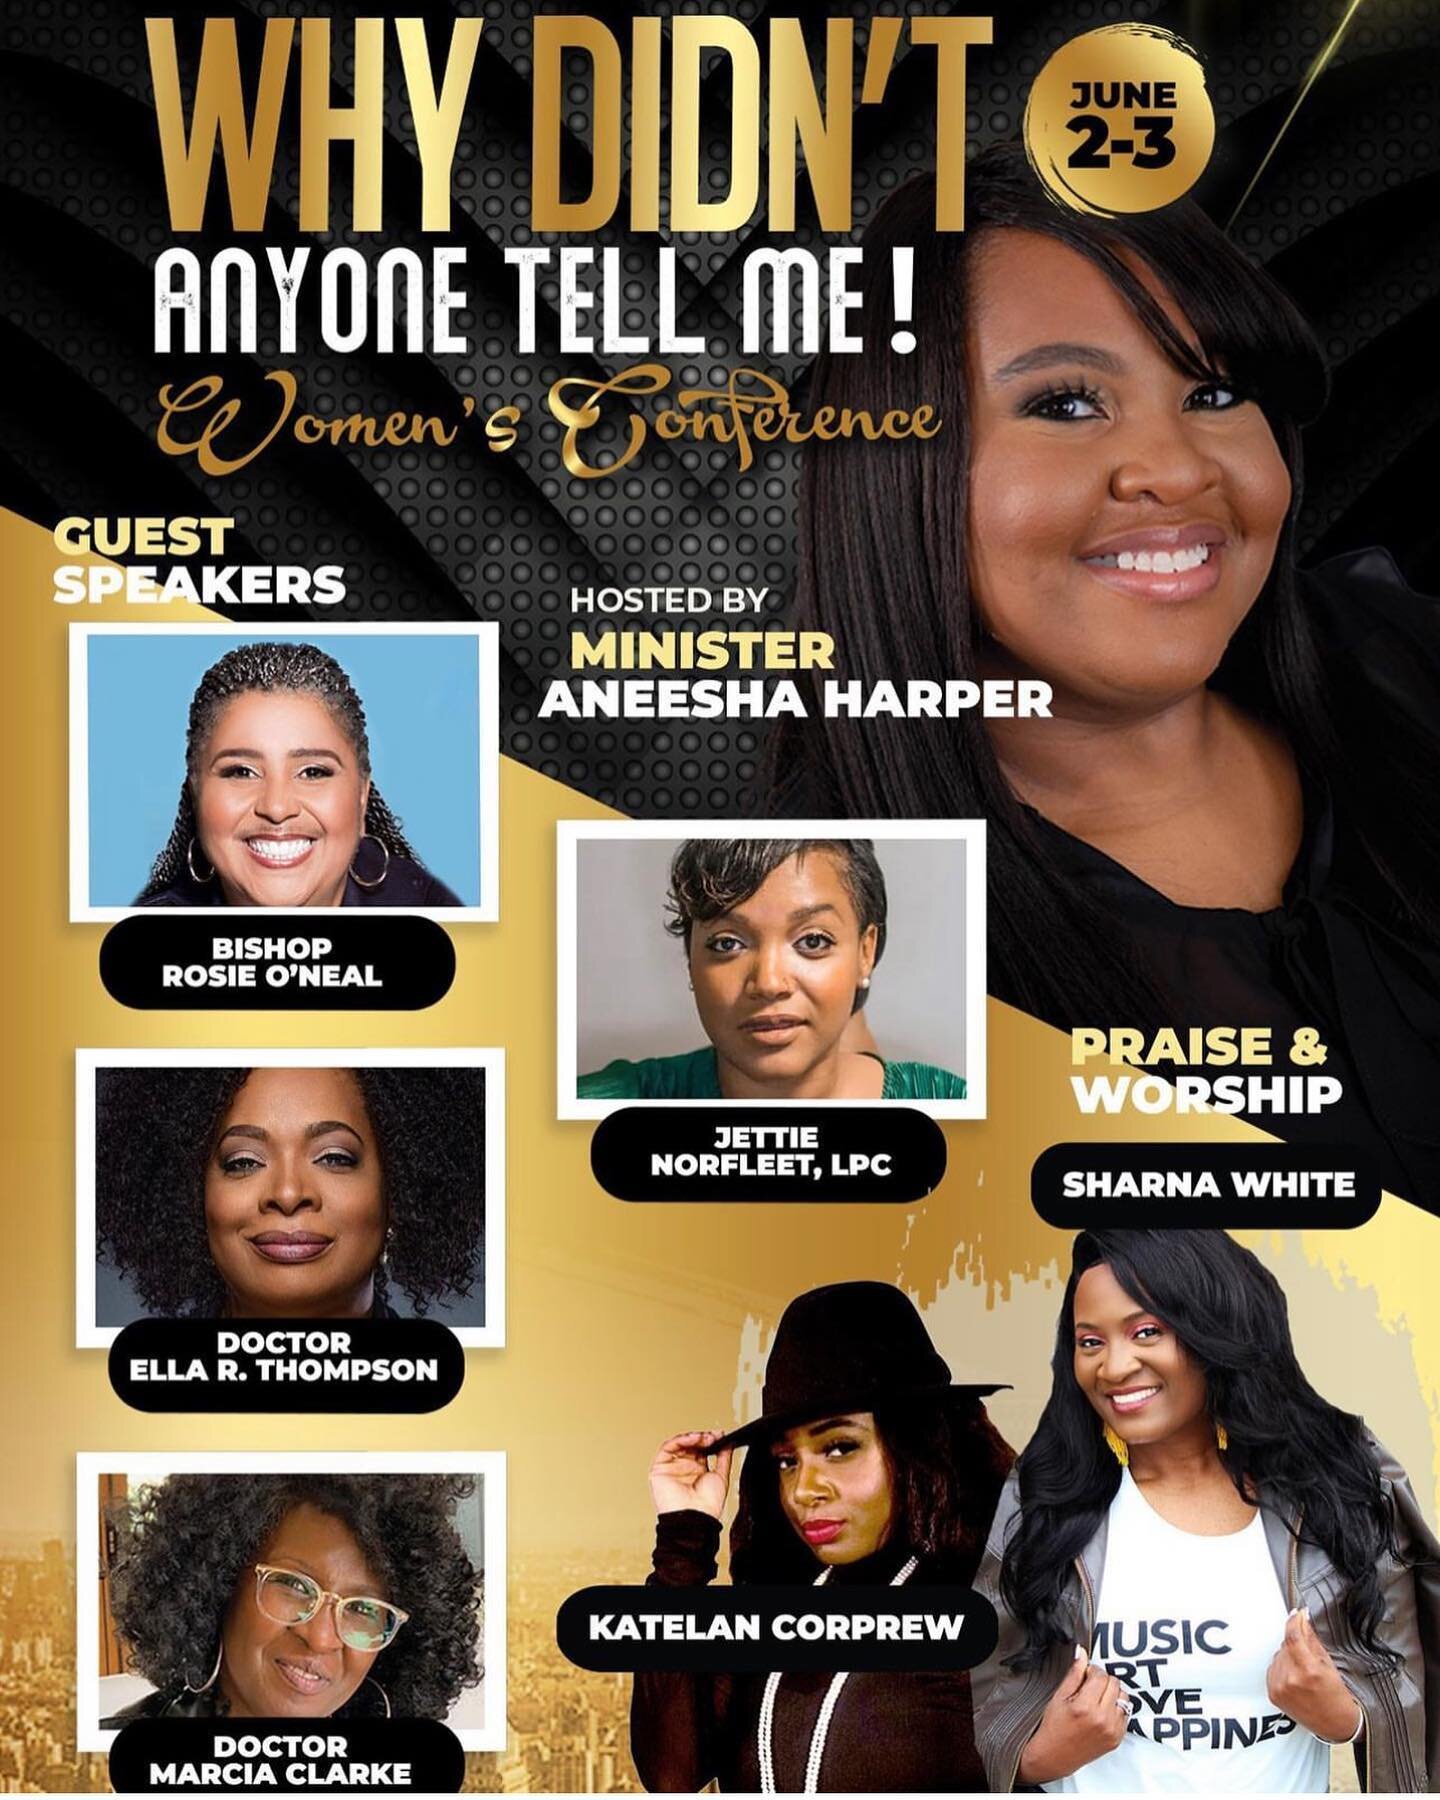 We are two weeks away from the Why Didn&rsquo;t Anyone Tell Me - Women&rsquo;s conference 🙌 by @harperfieldministries 

I can&rsquo;t wait to minister with these amazing women! Check their page for more information.